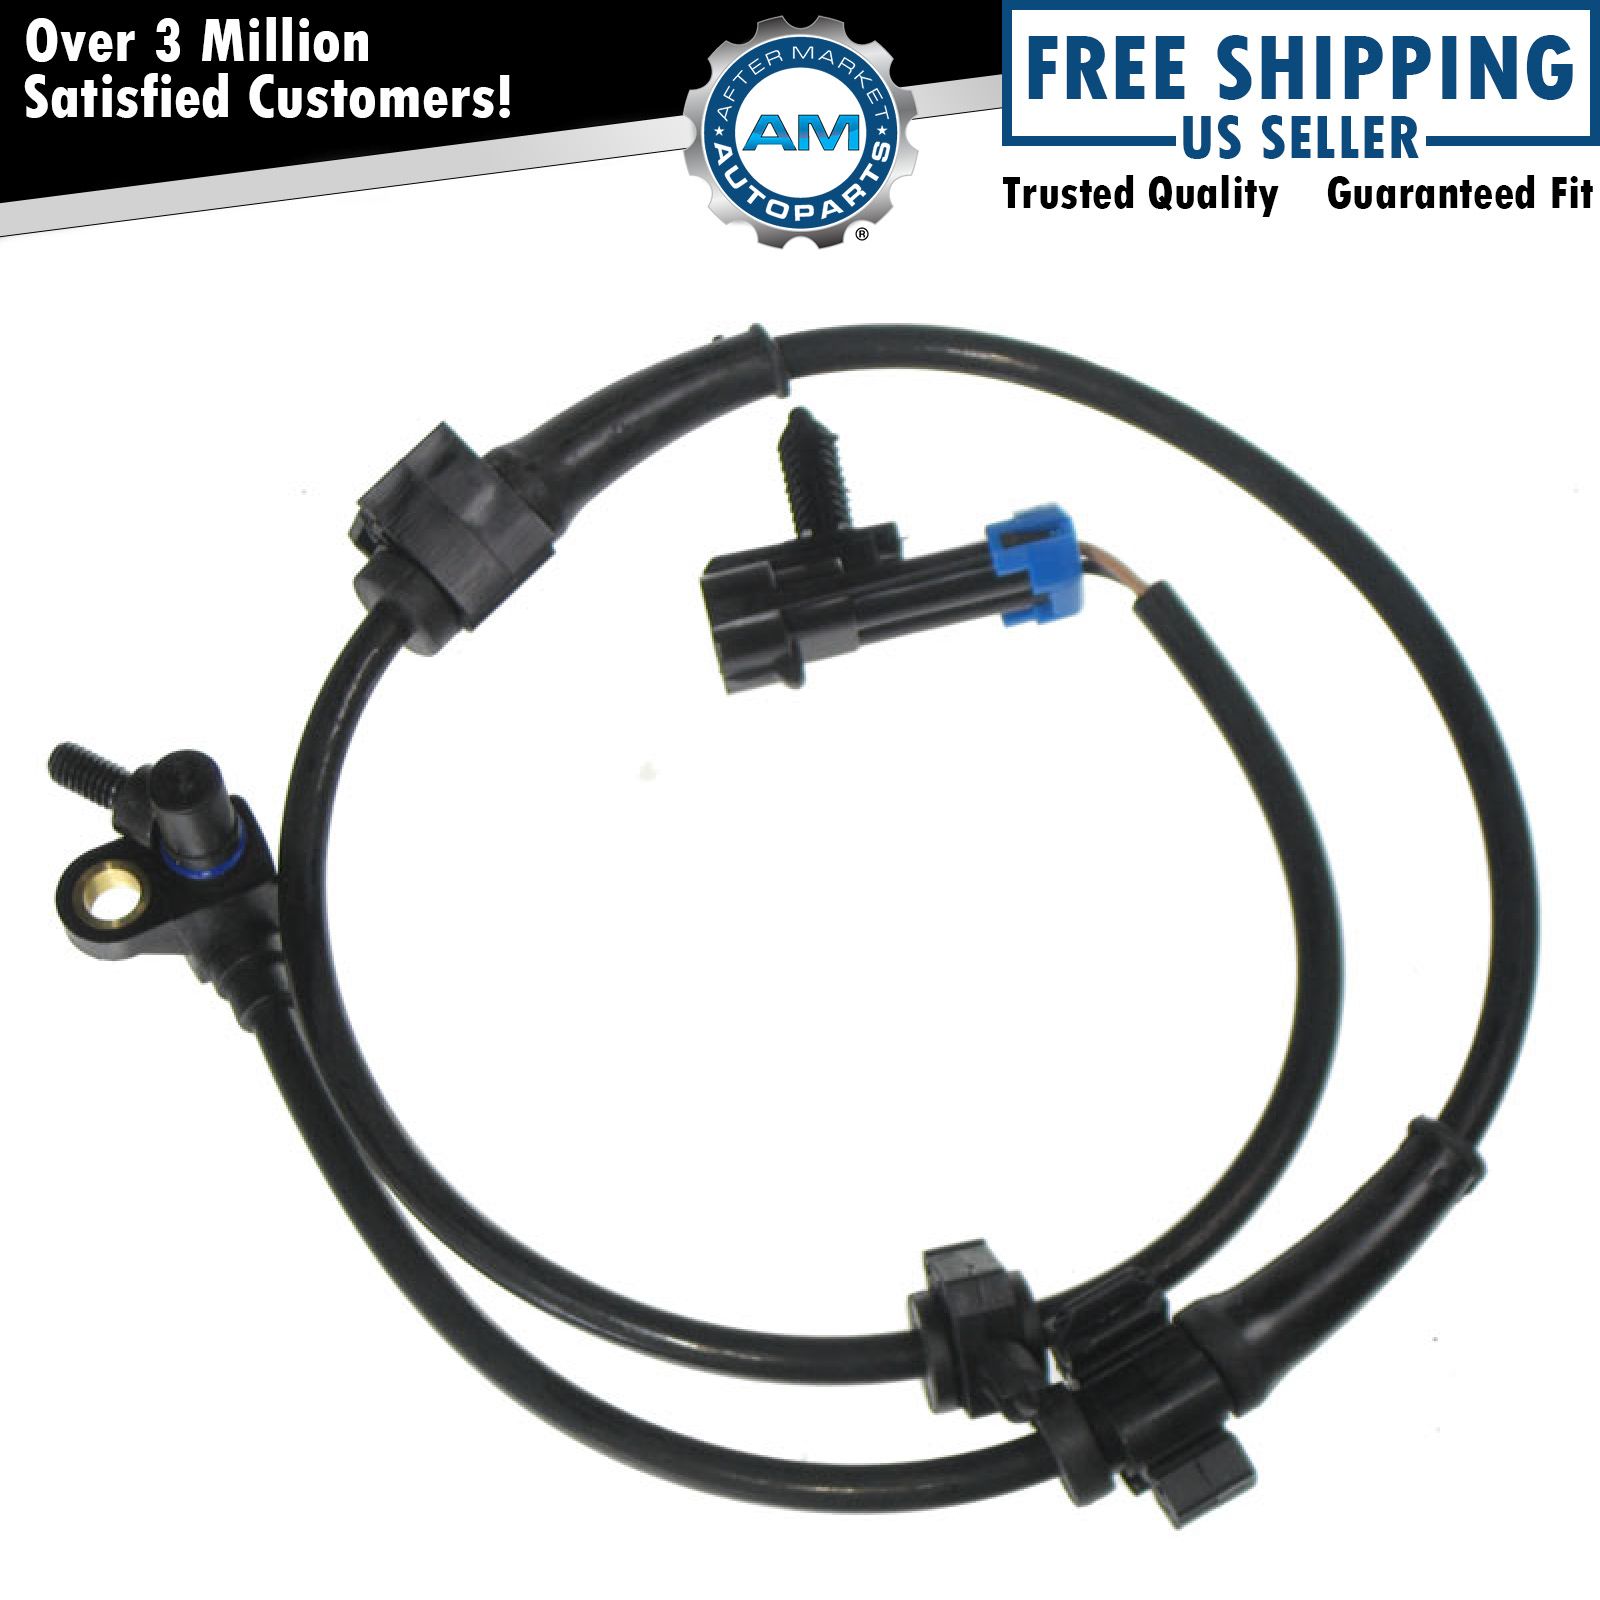 Front Wheel ABS Brake Sensor w/ Harness Connector for Chevy GMC Pickup Truck